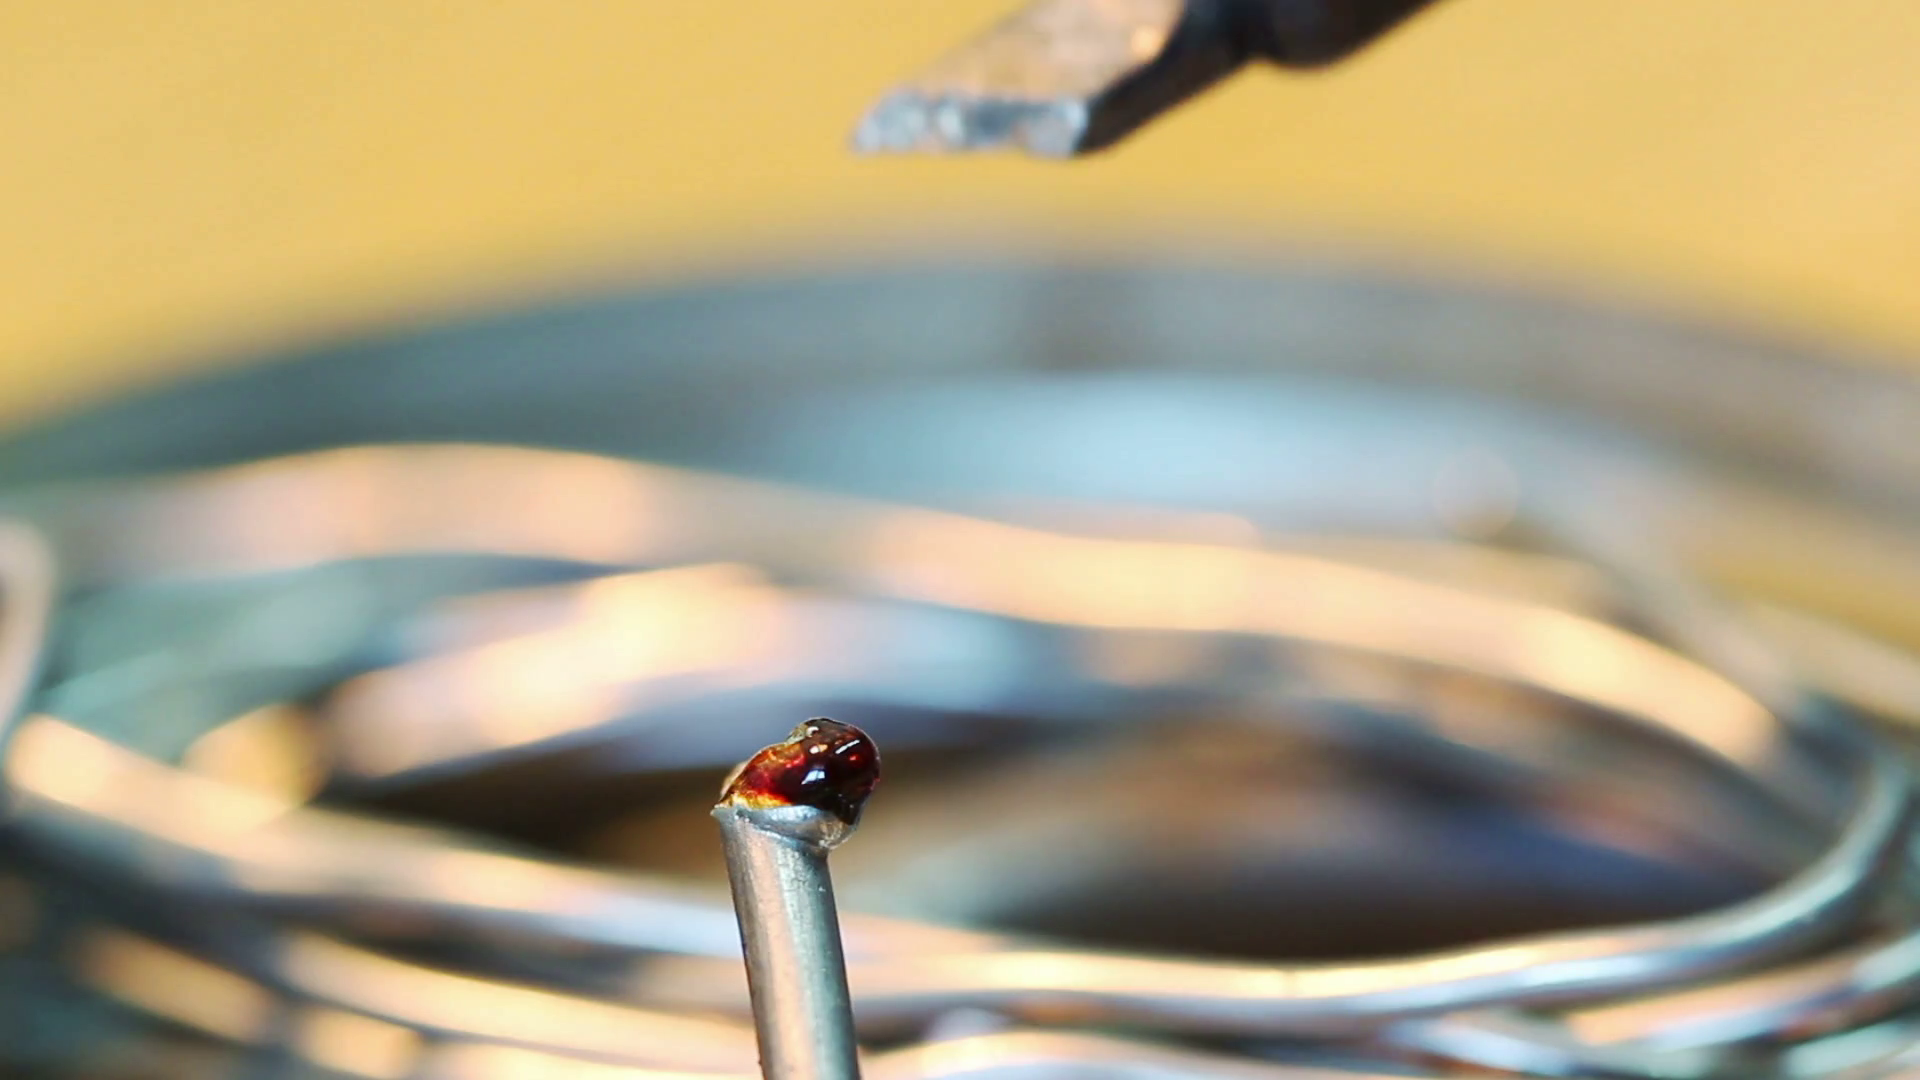 Melting Solder Wwire On Soldering Iron Tip Stock Video Footage ...